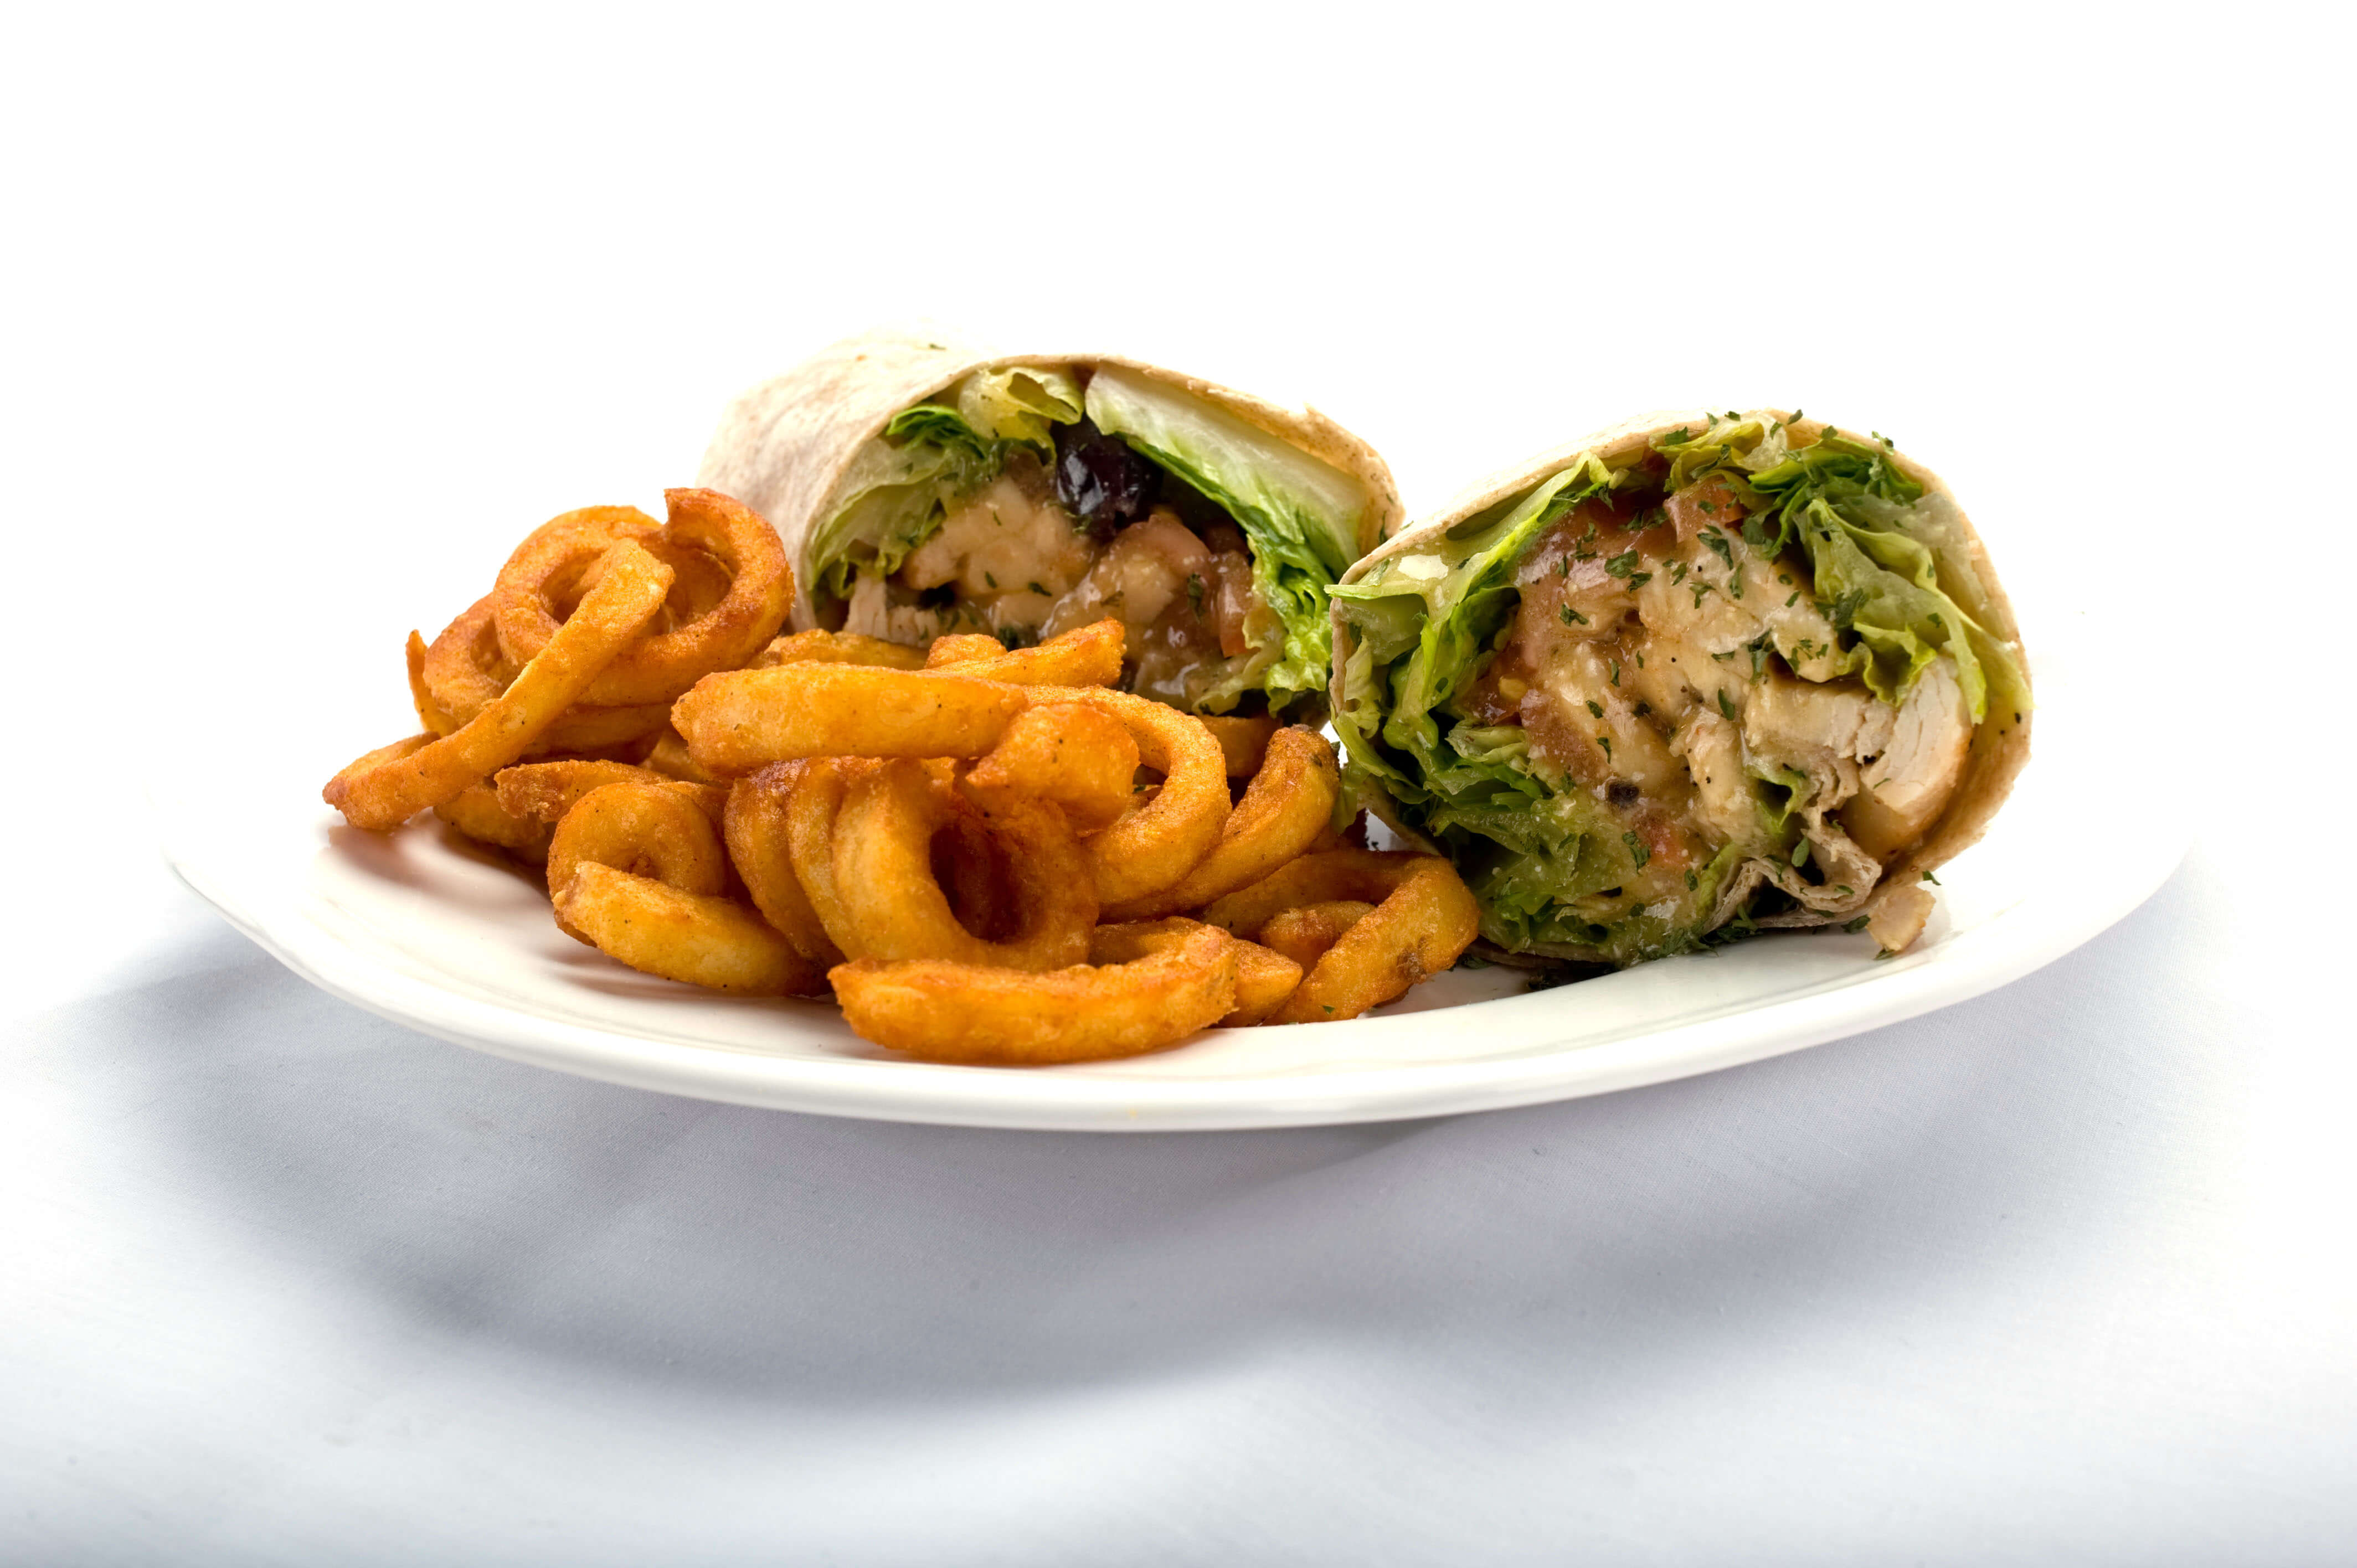 Chicken Caesar wrap with curly fries